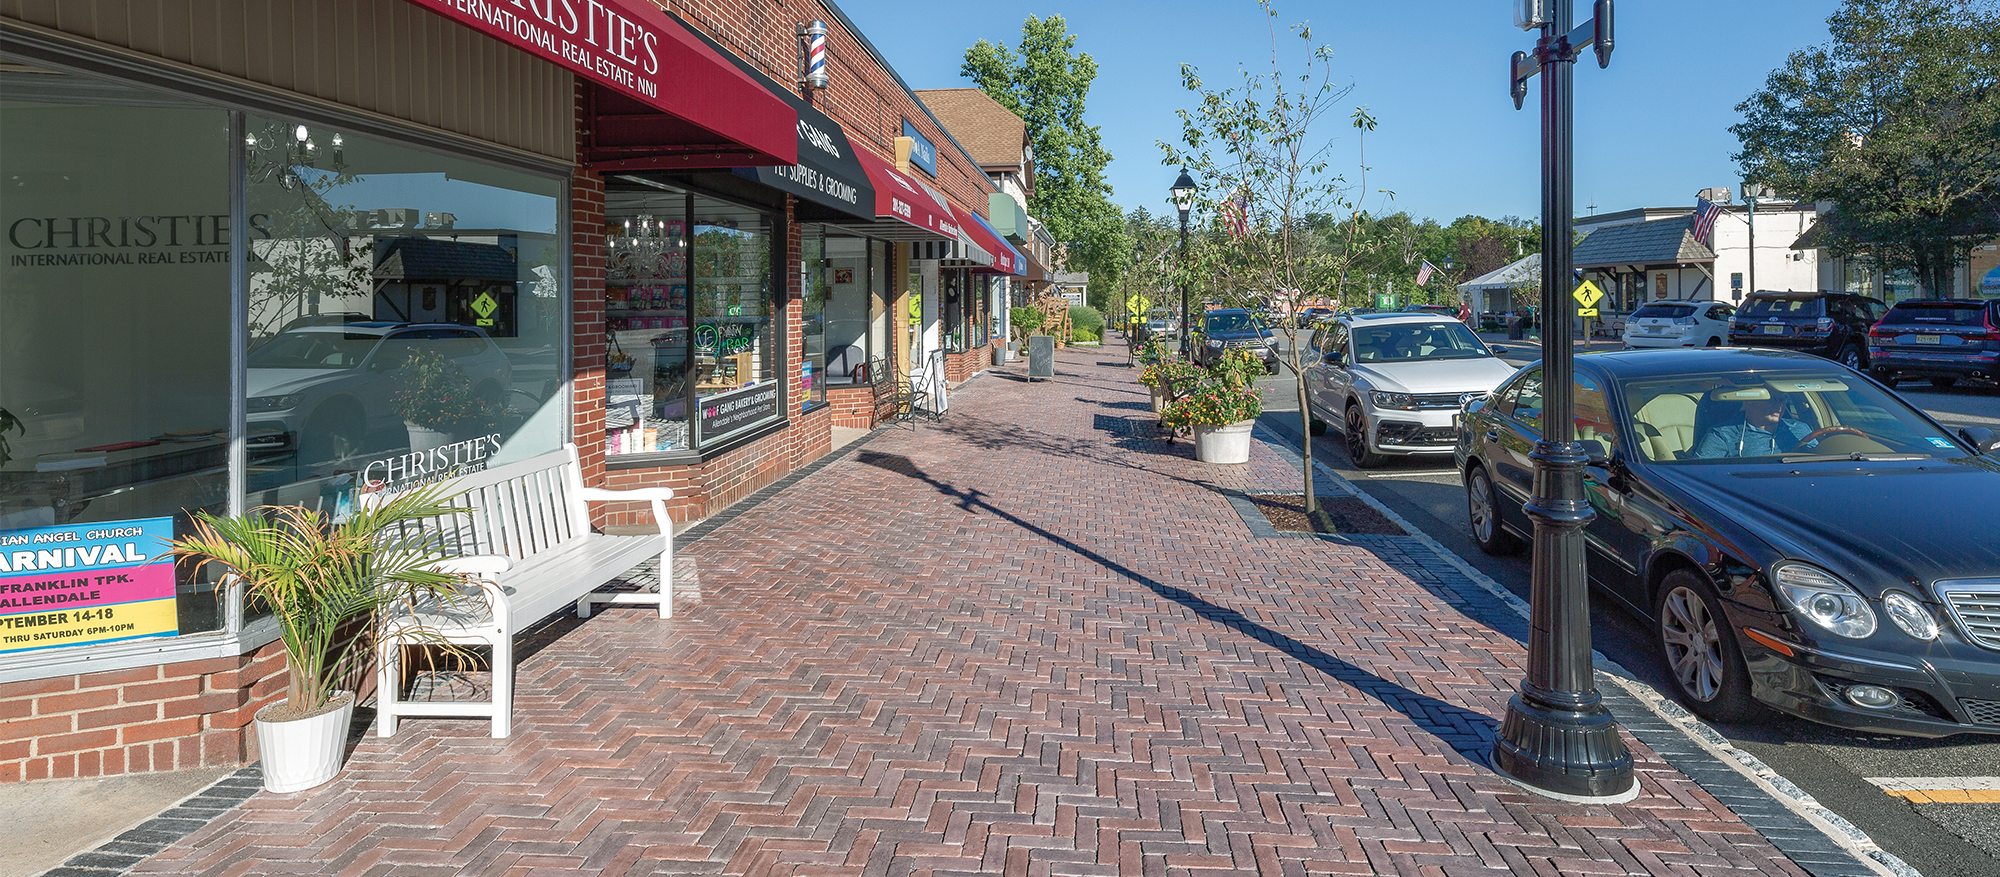 A raised sidewalk with warm tones of Copthorne pavers in a herringbone pattern has contrasting lines of black pavers on the sides.